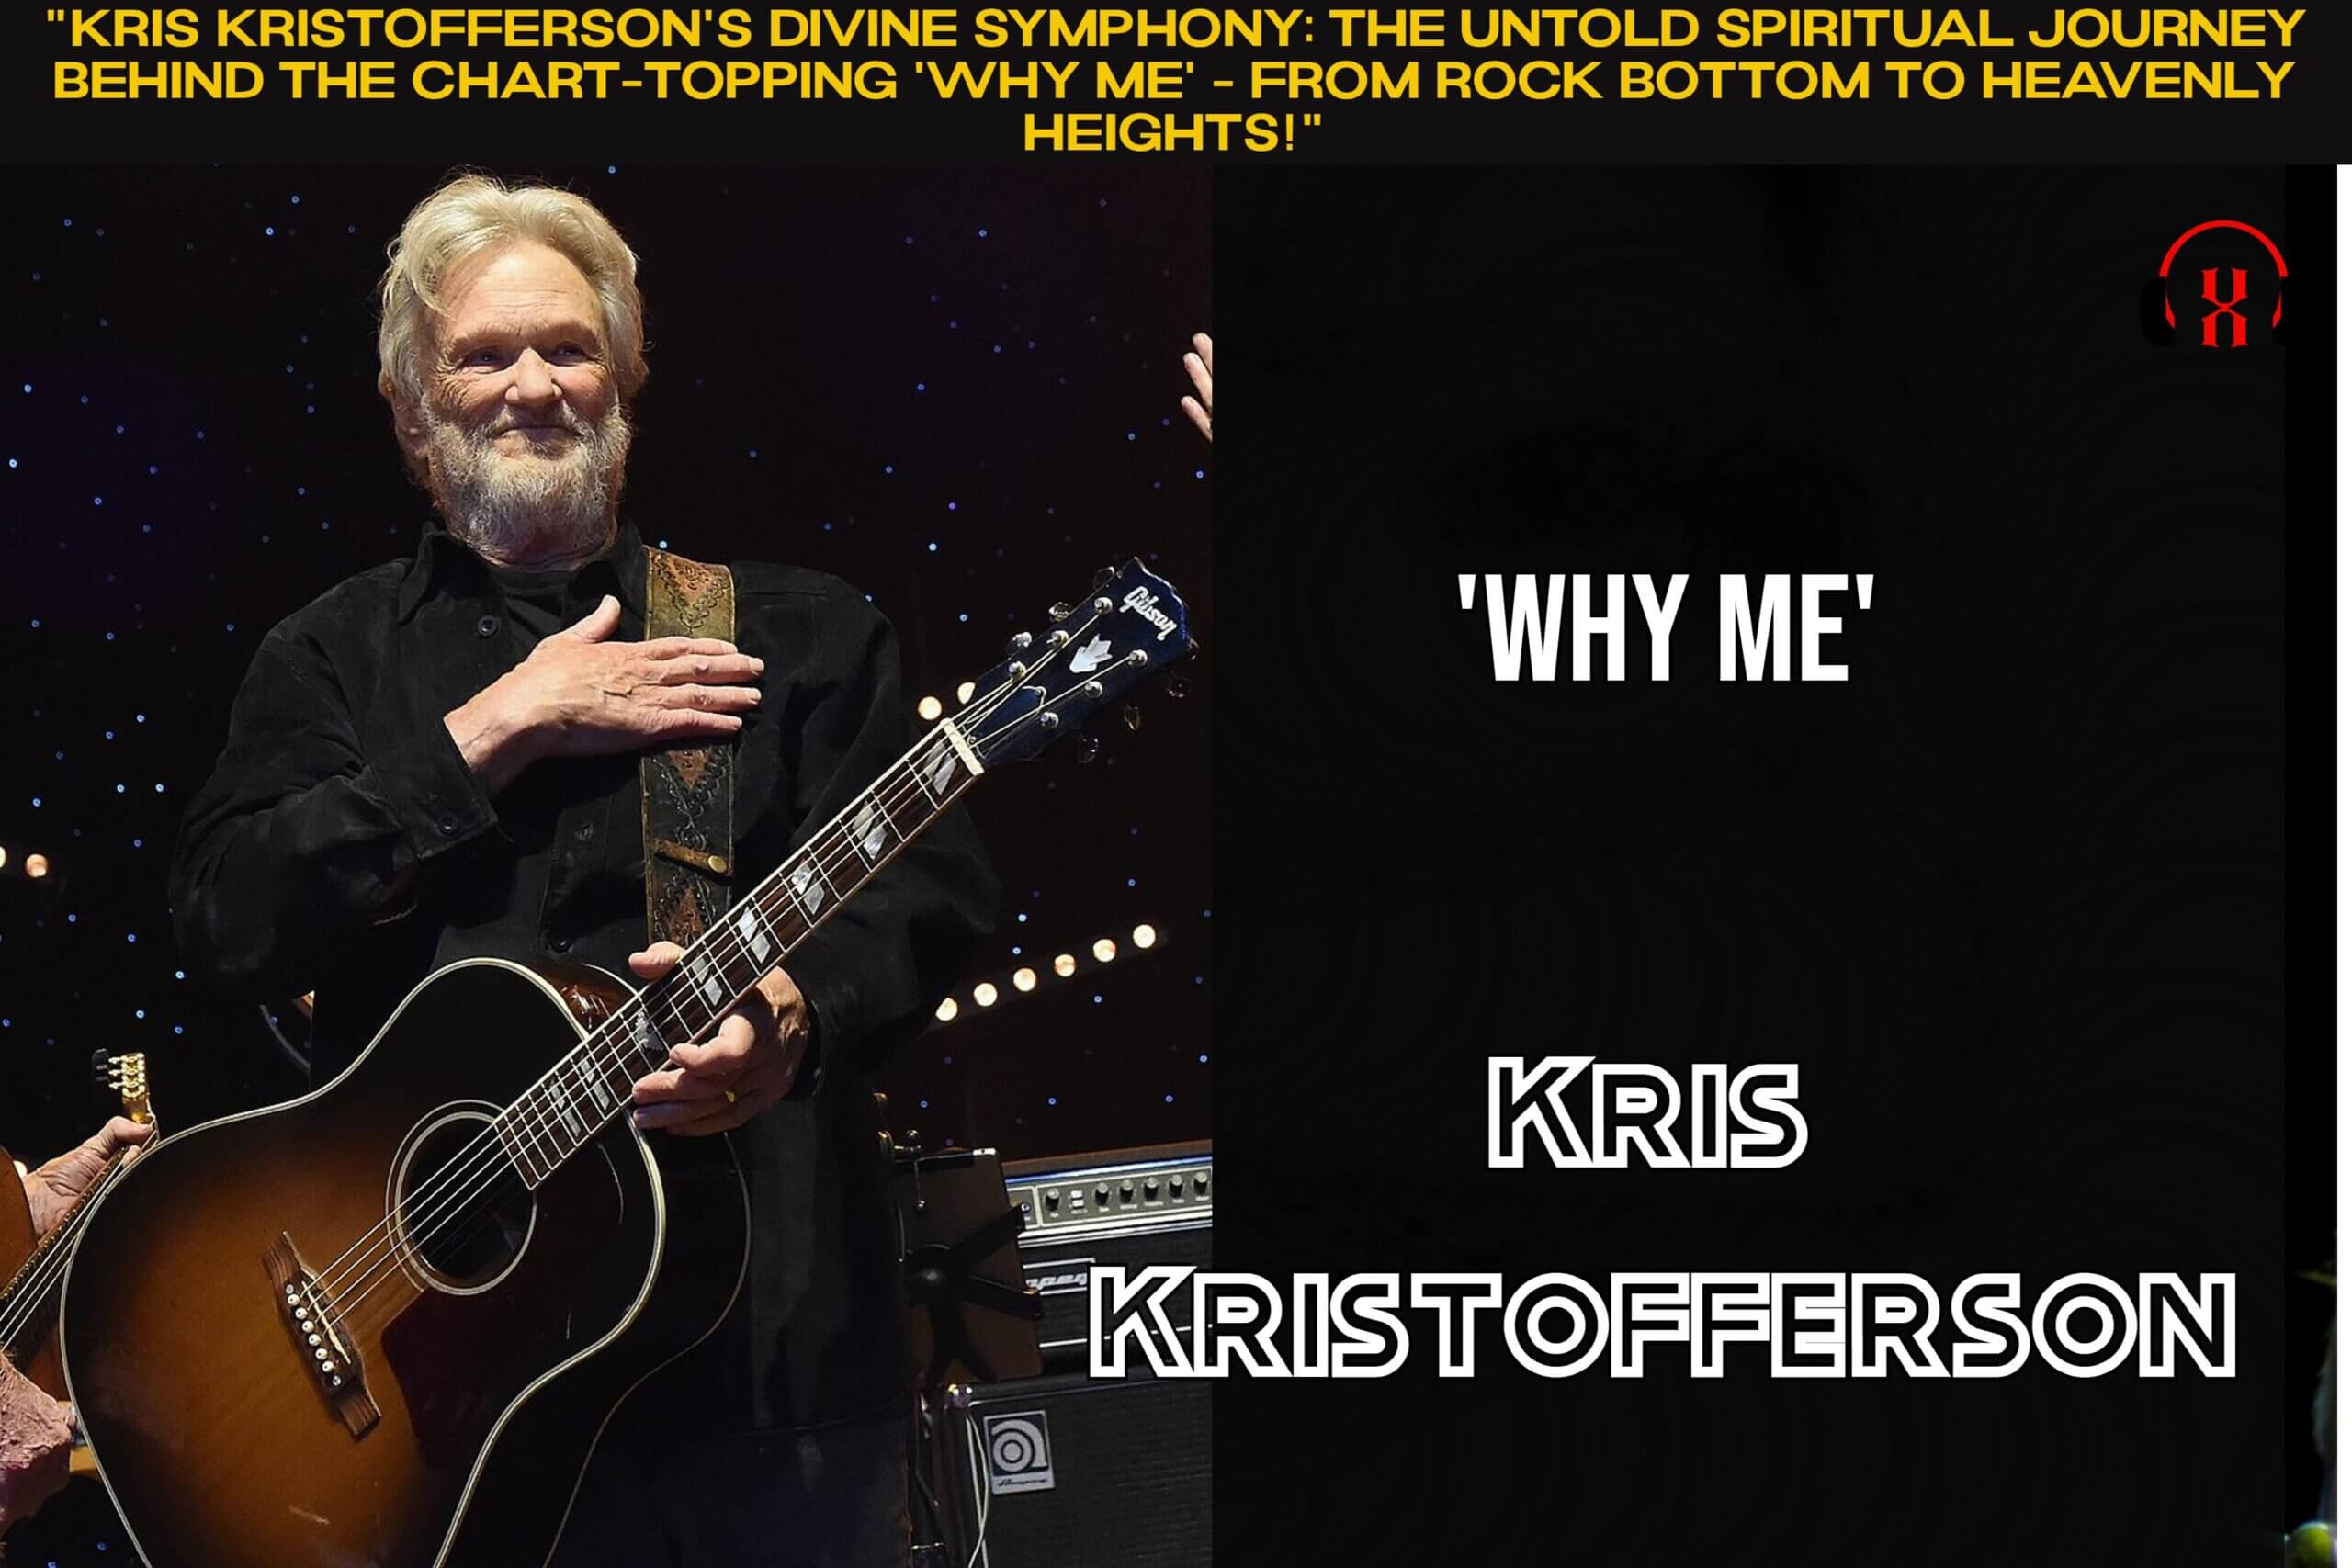 "Kris Kristofferson's Divine Symphony: The Untold Spiritual Journey Behind the Chart-Topping 'Why Me' - From Rock Bottom to Heavenly Heights!"